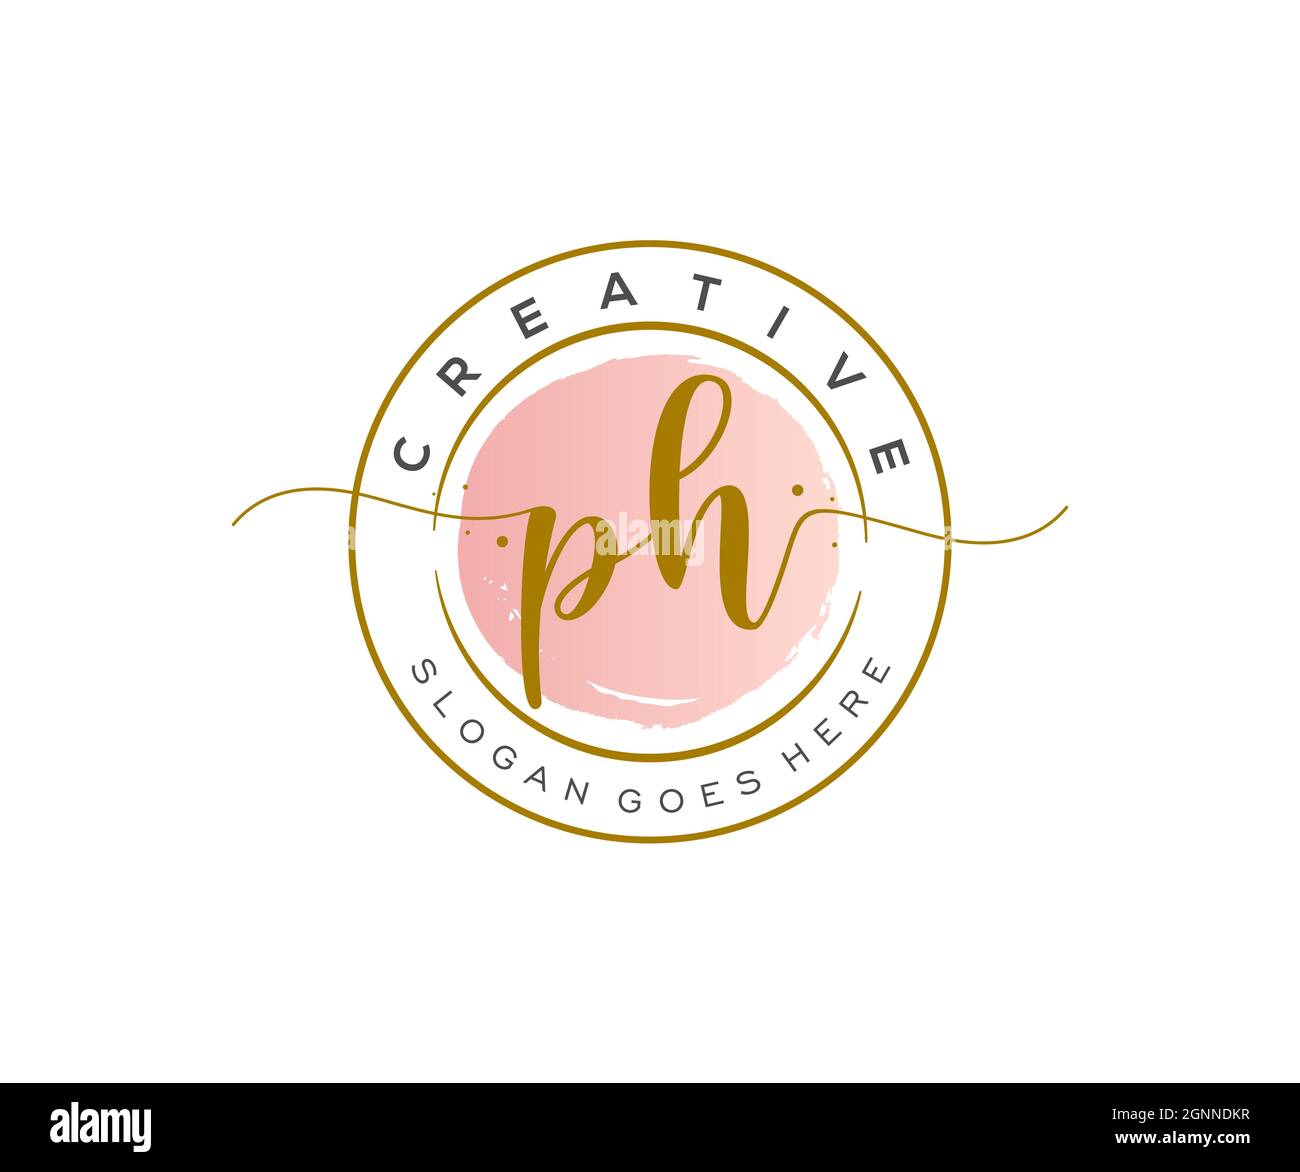 PM beauty monogram and elegant logo design handwriting logo of initial  signature, wedding, fashion, floral and botanical with creative template  Stock Vector Image & Art - Alamy